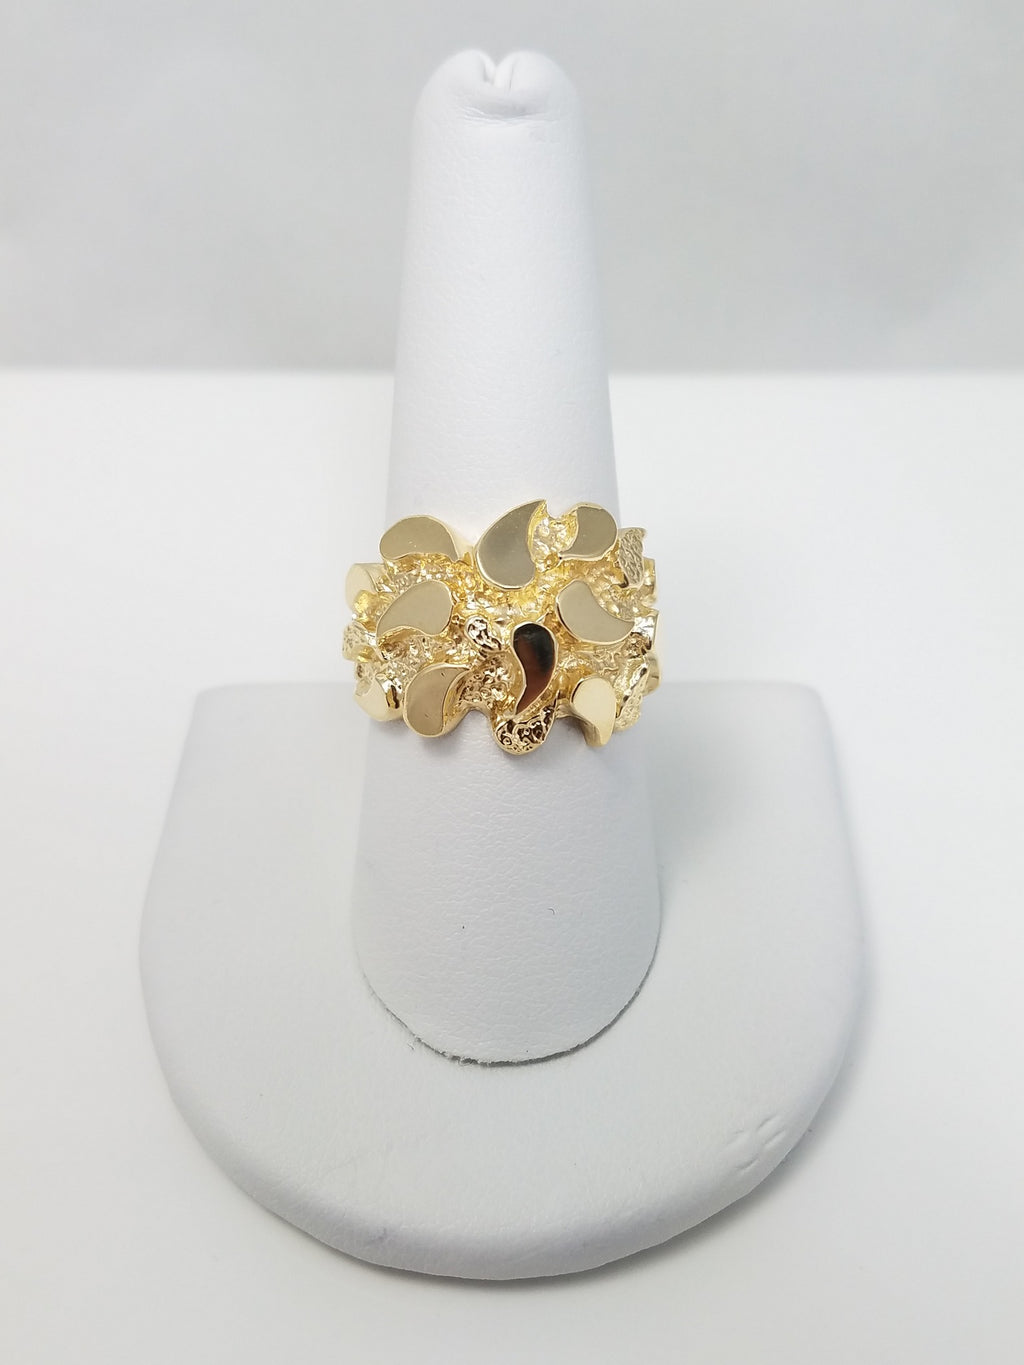 New! 14k Yellow Gold Nugget Ring